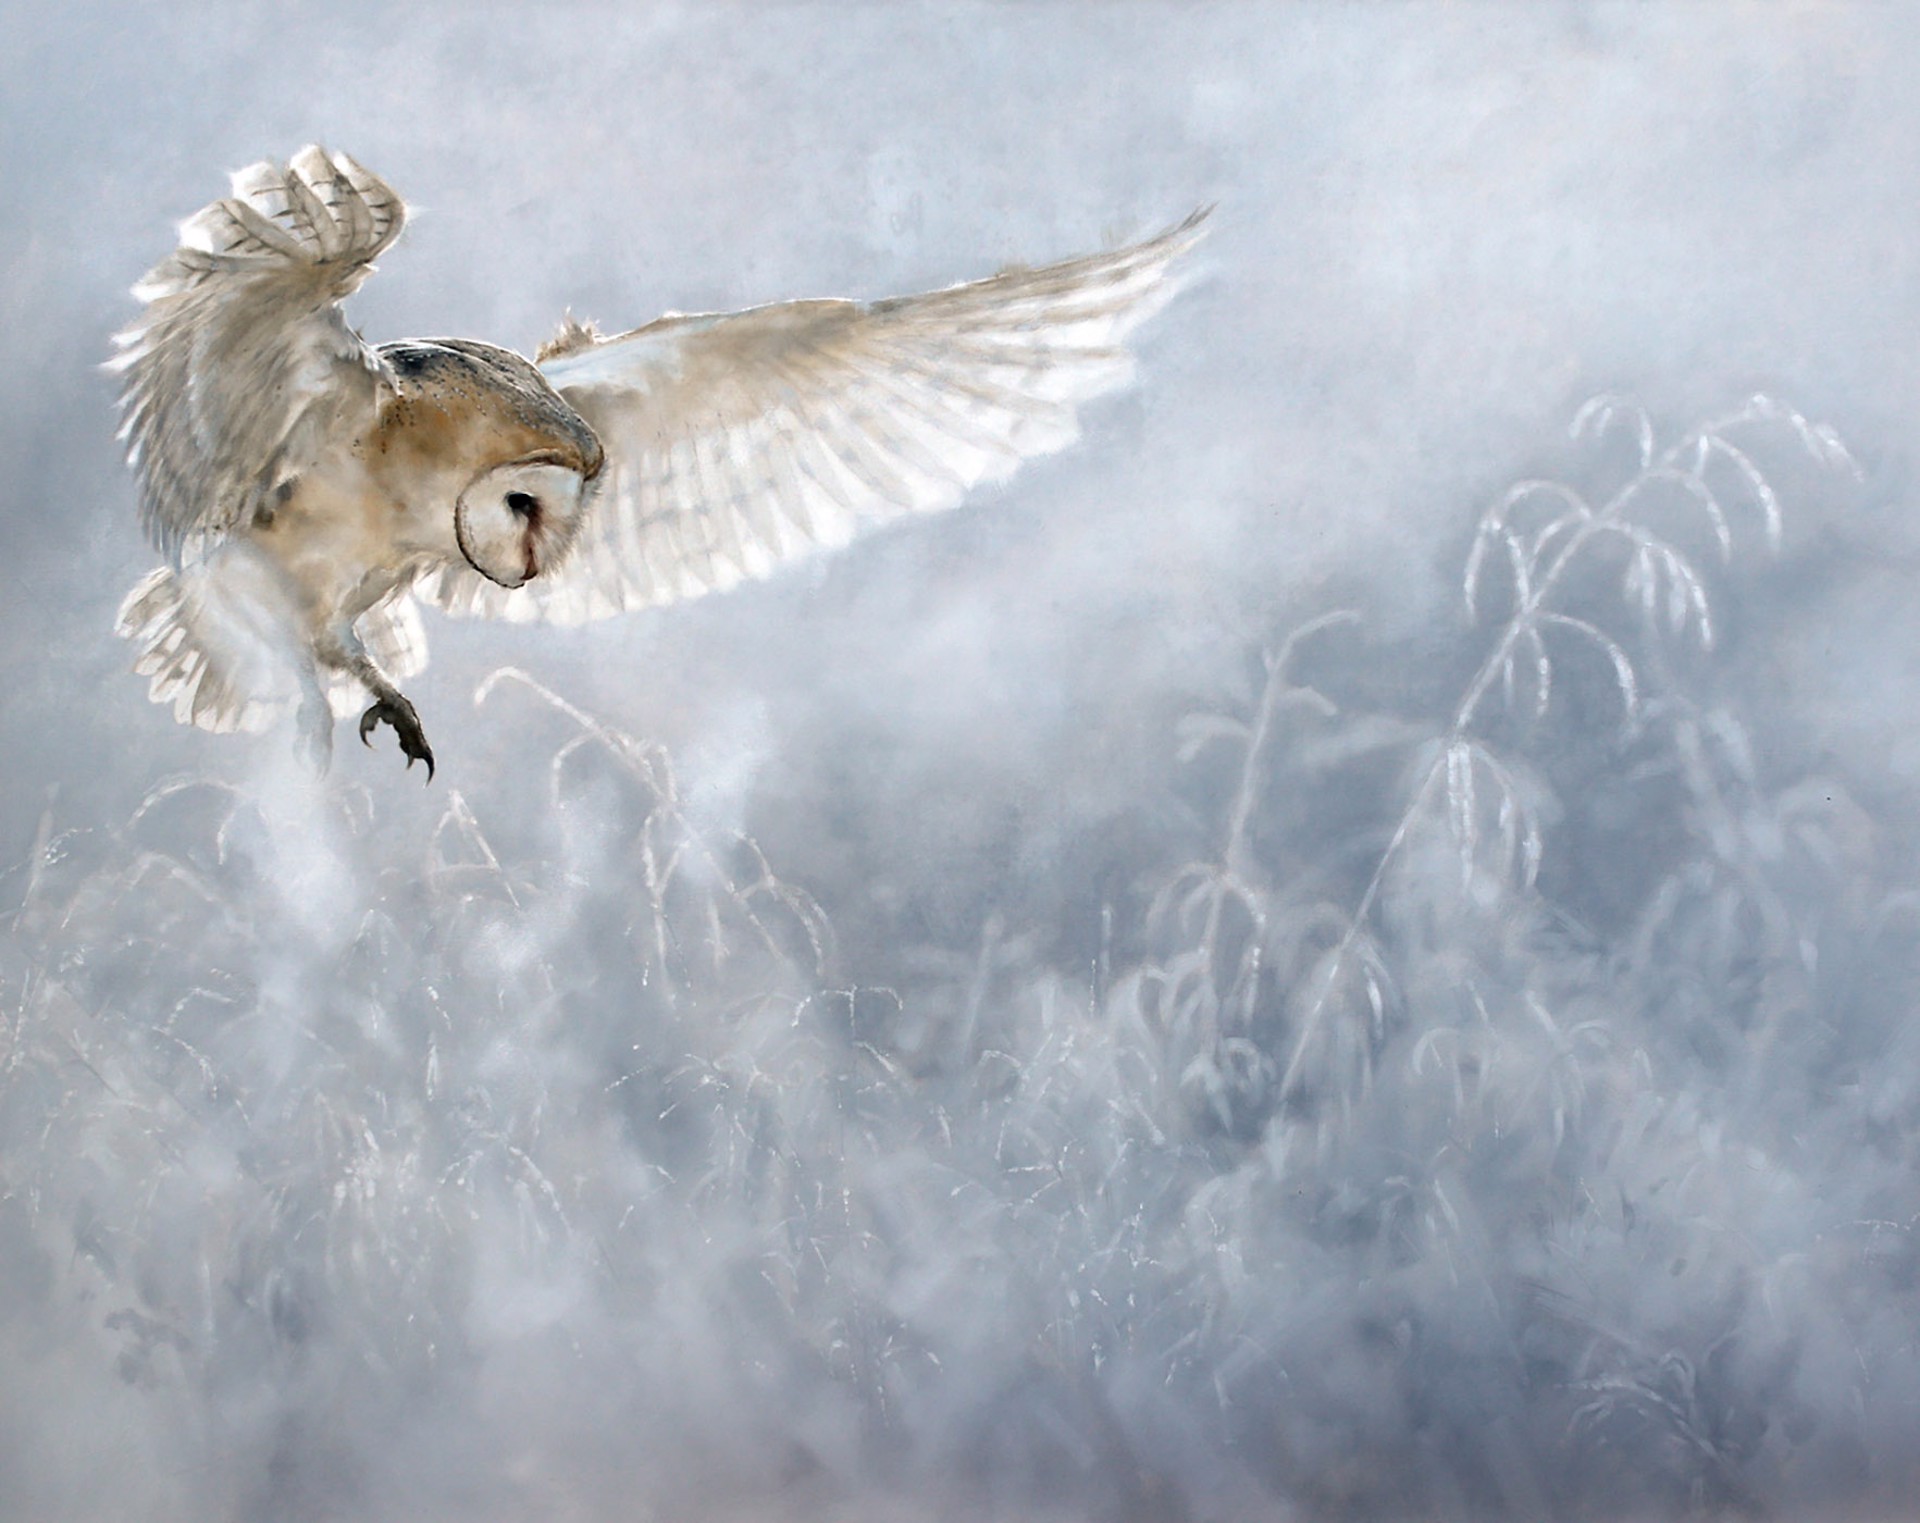 Original Oil Painting By Doyle Hostetler Featuring A Snowy Owl In Flight Over Blurry Snow Covered Landscape